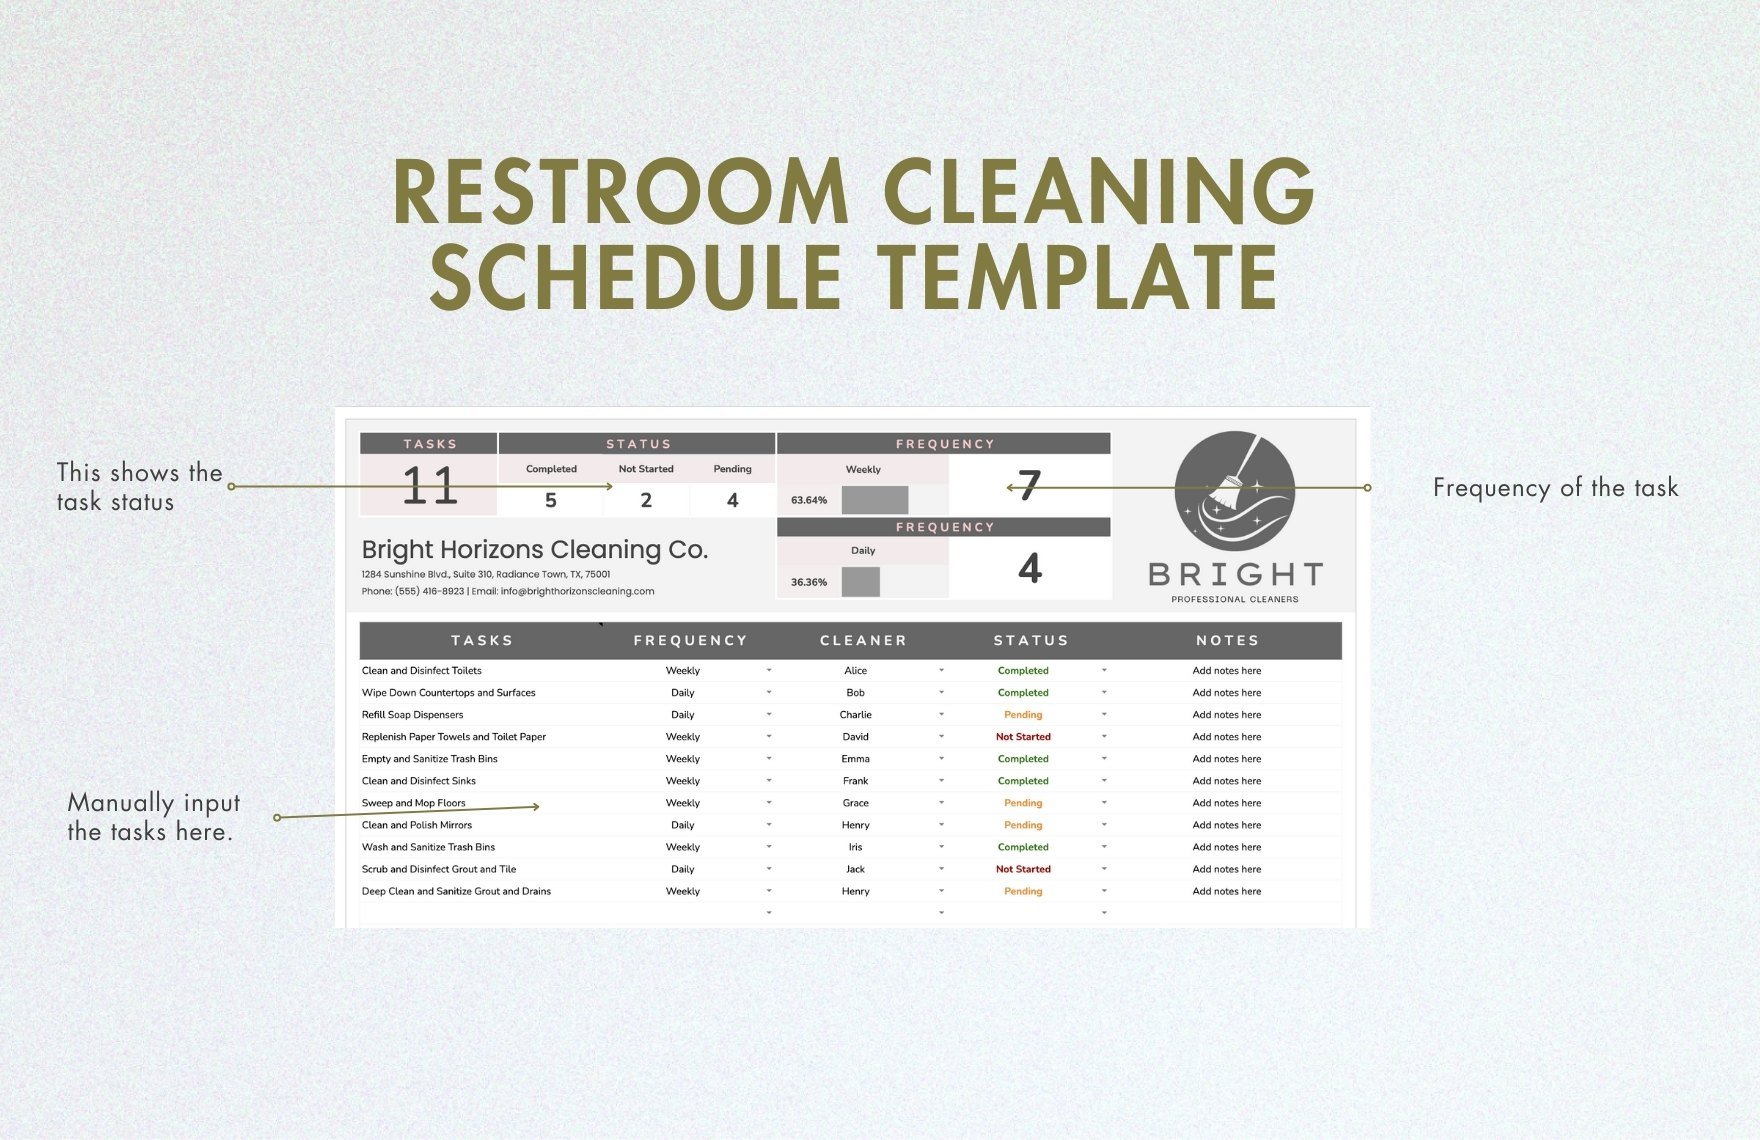 Restroom Cleaning Schedule Template